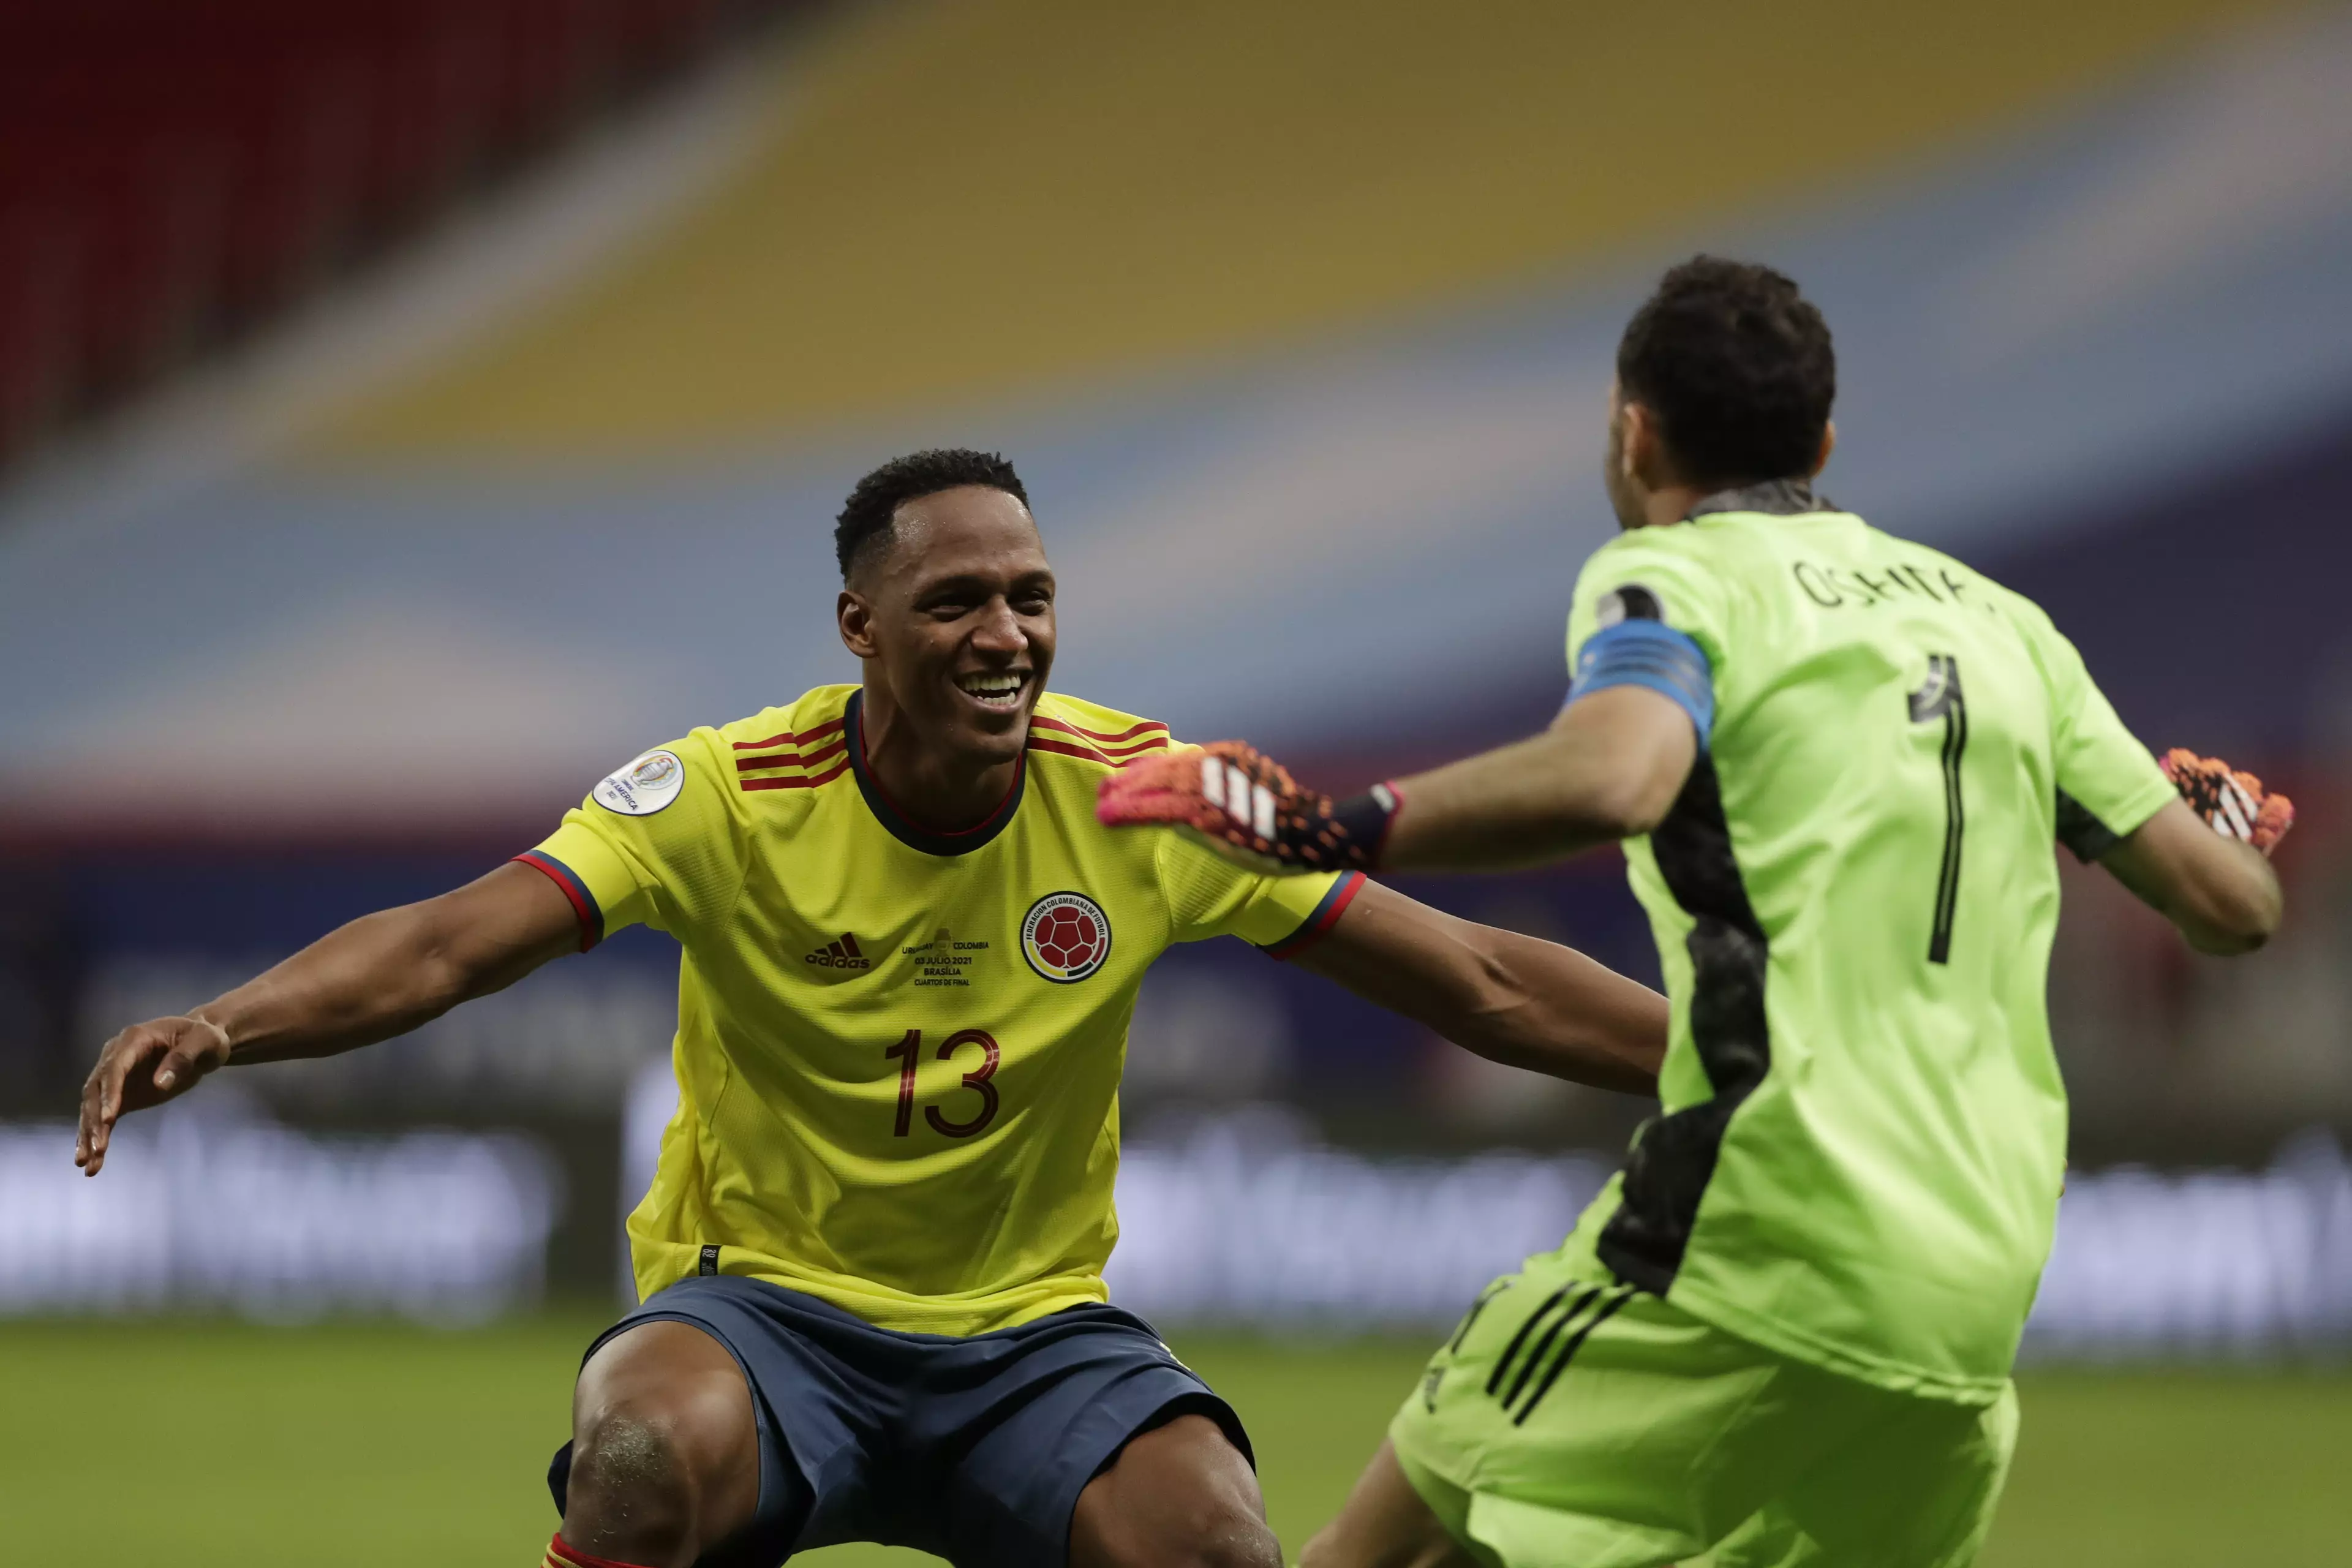 Mina celebrates for the second time in the shoot out, this time after Colombia had won. Image: PA Images